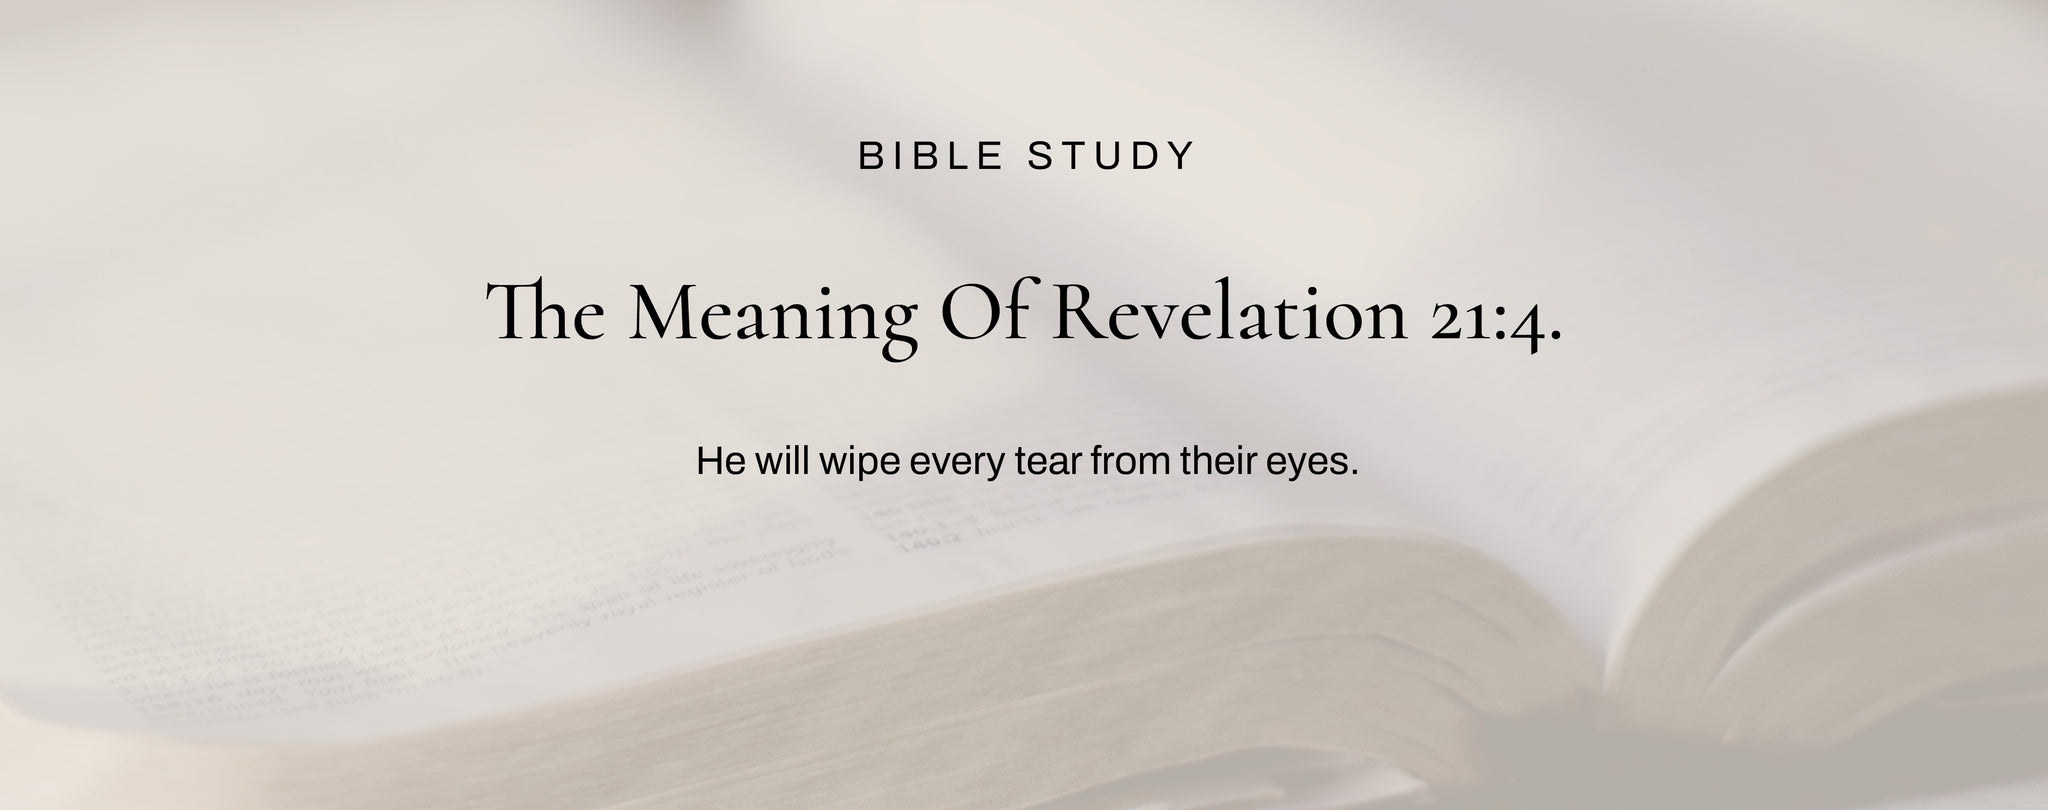 What Does Revelation 21:4 Mean?